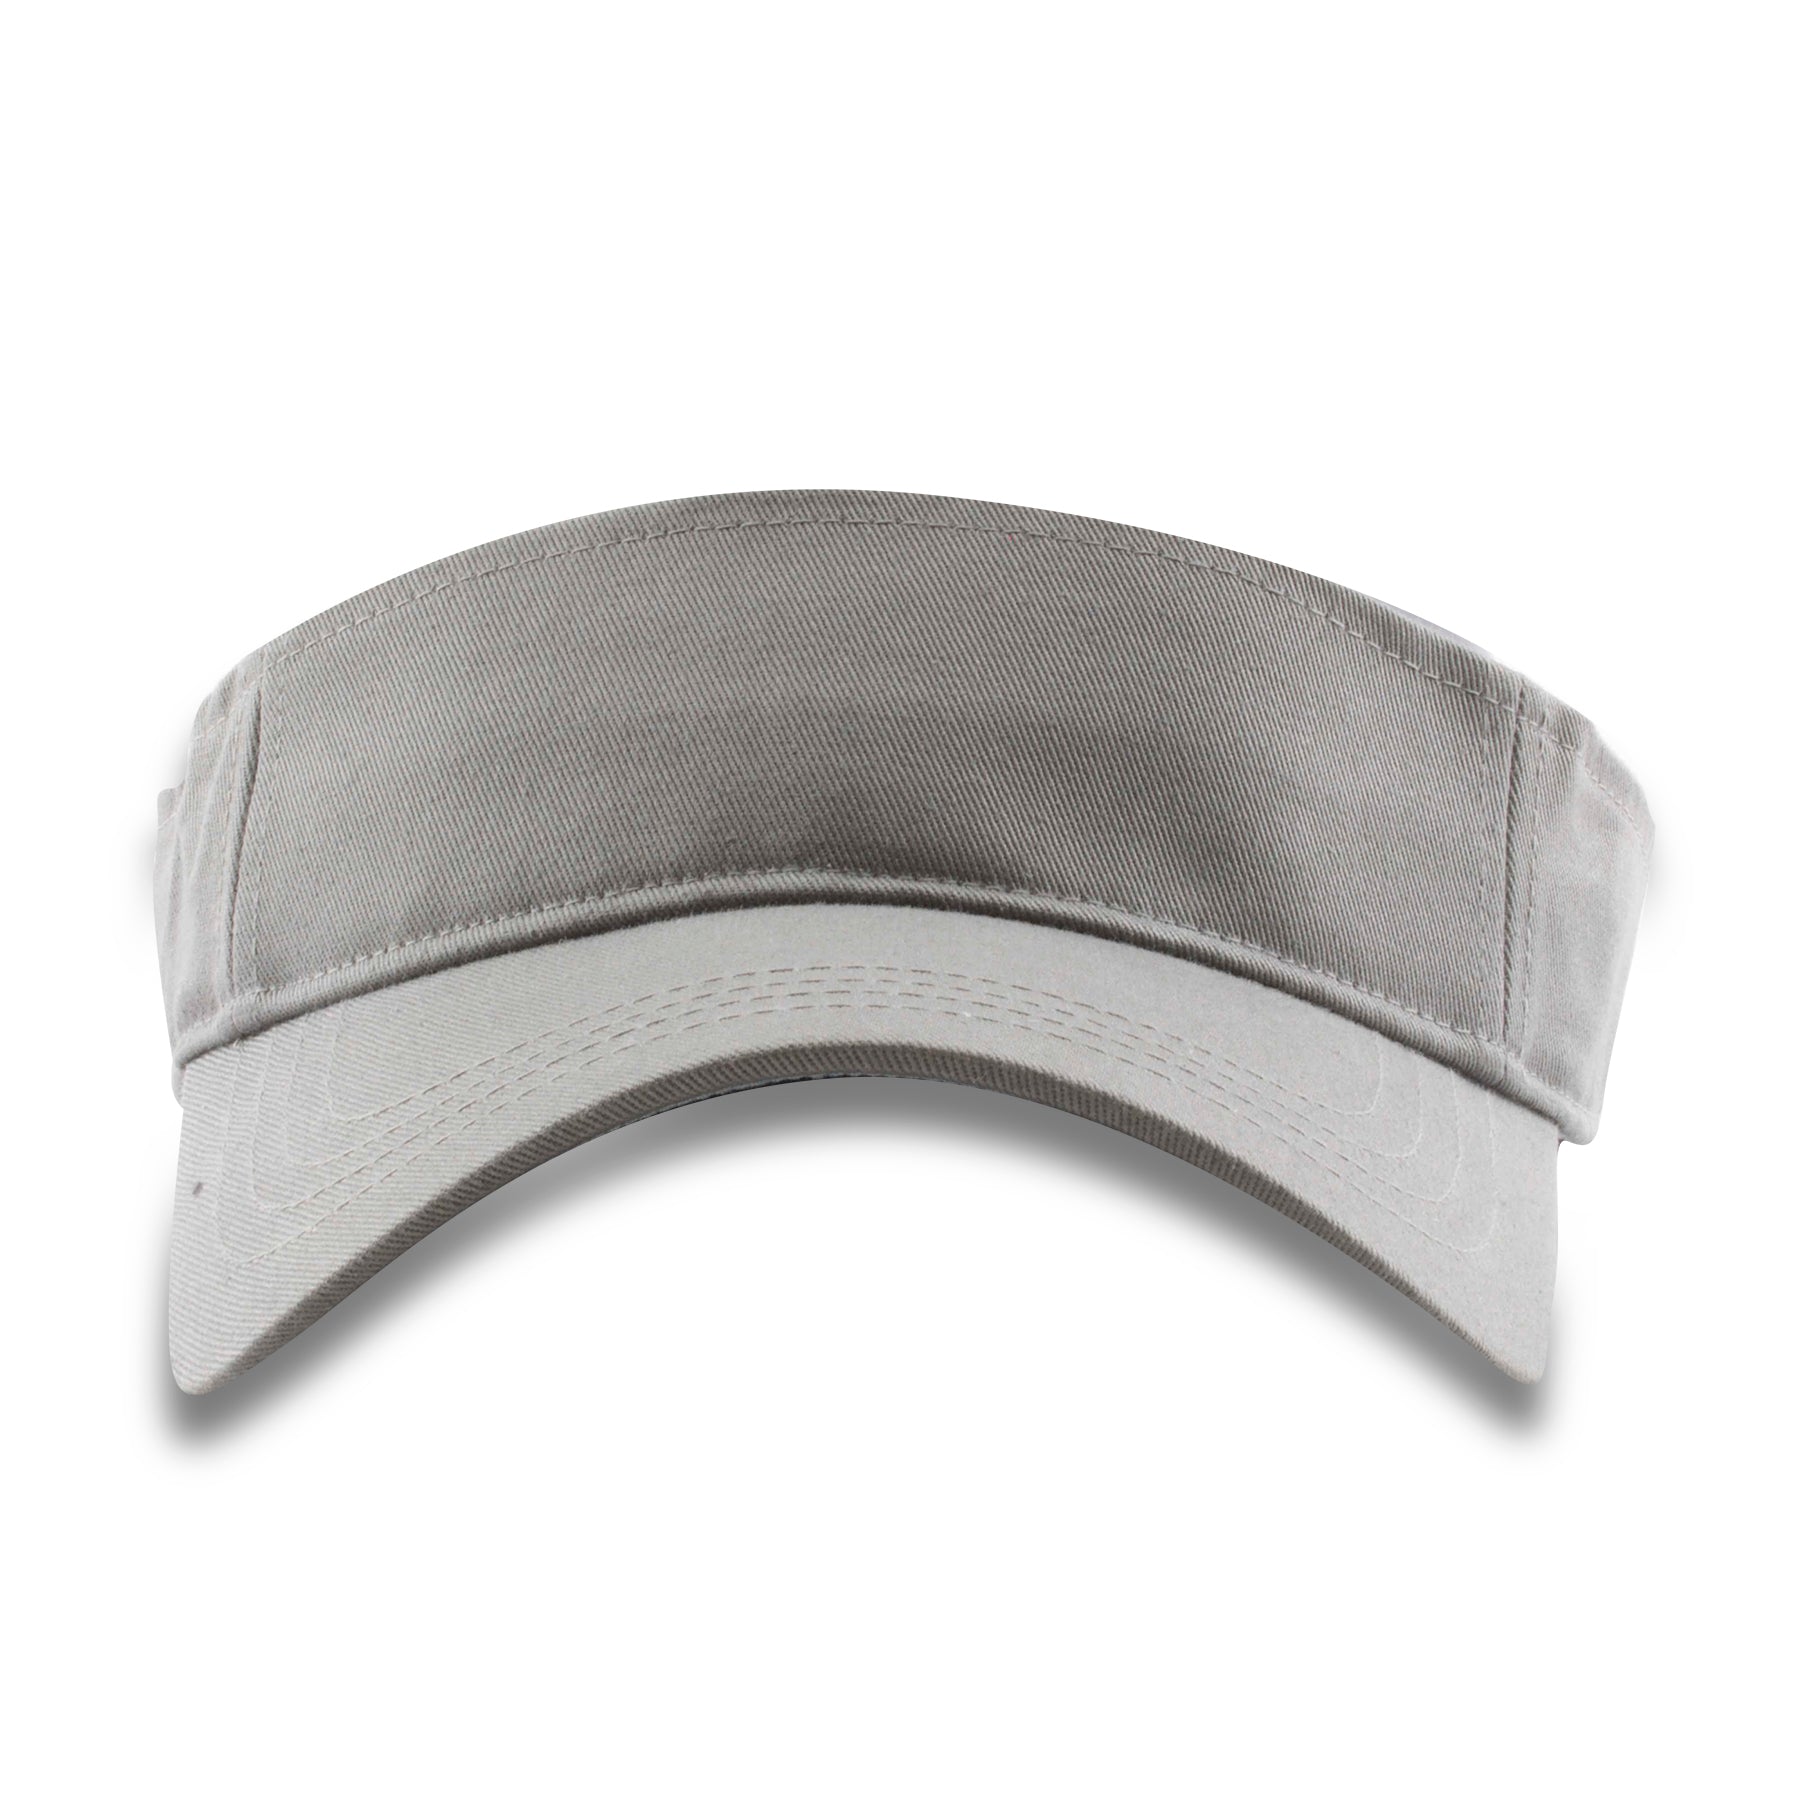 The light gray blank visor has a mid-height crown with a bent brim